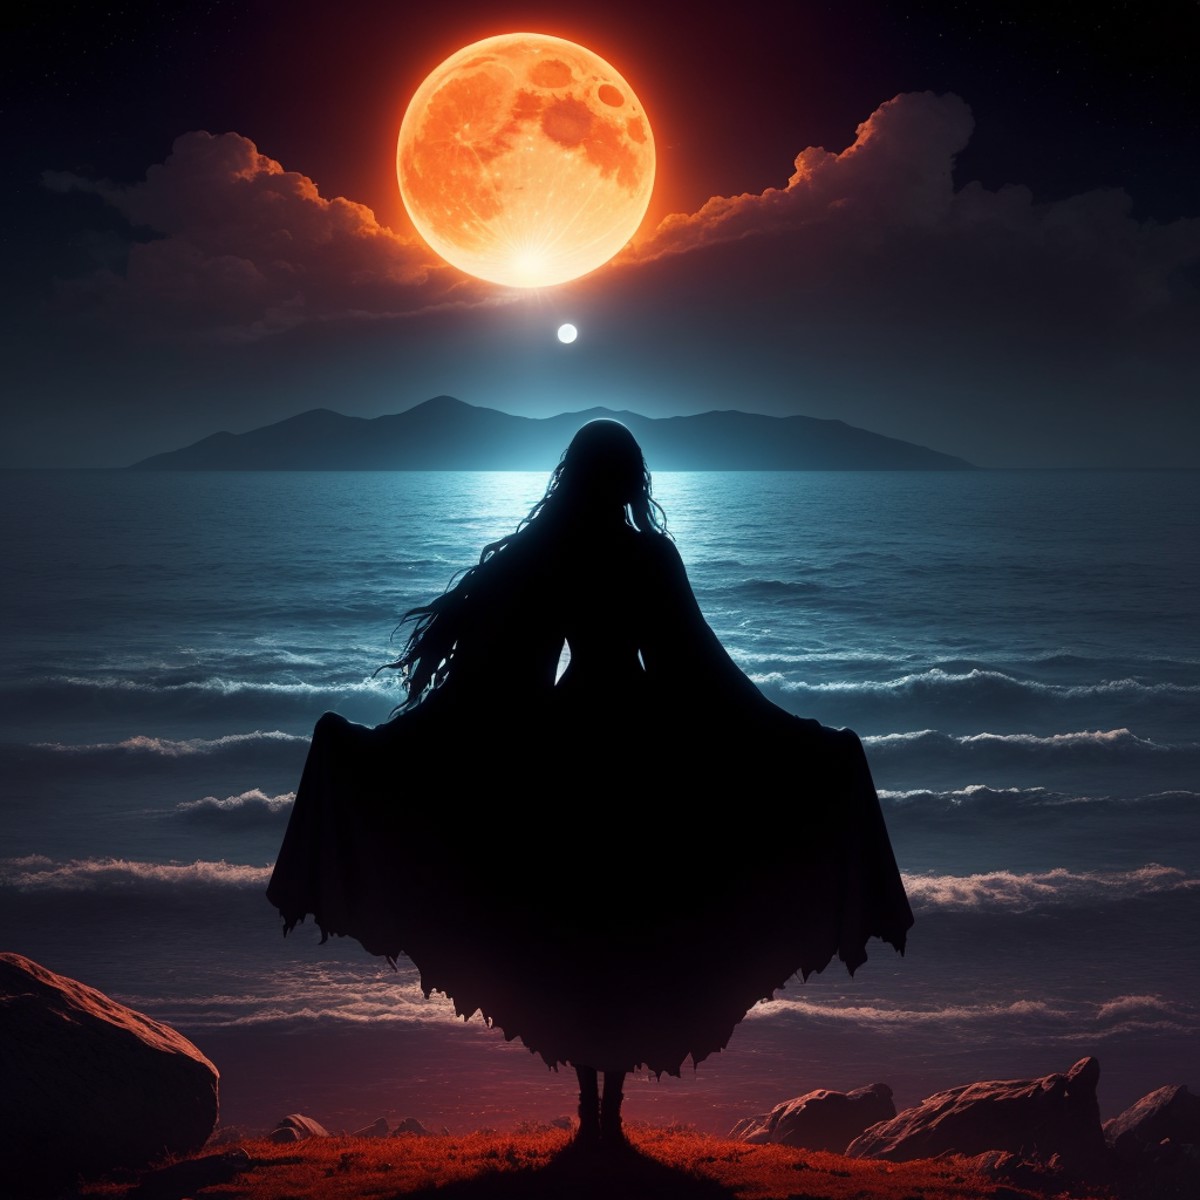 My funeral
When the moon replaces the sun
I will leave too
She shines on me with sadness
Always
And after death I will ris...